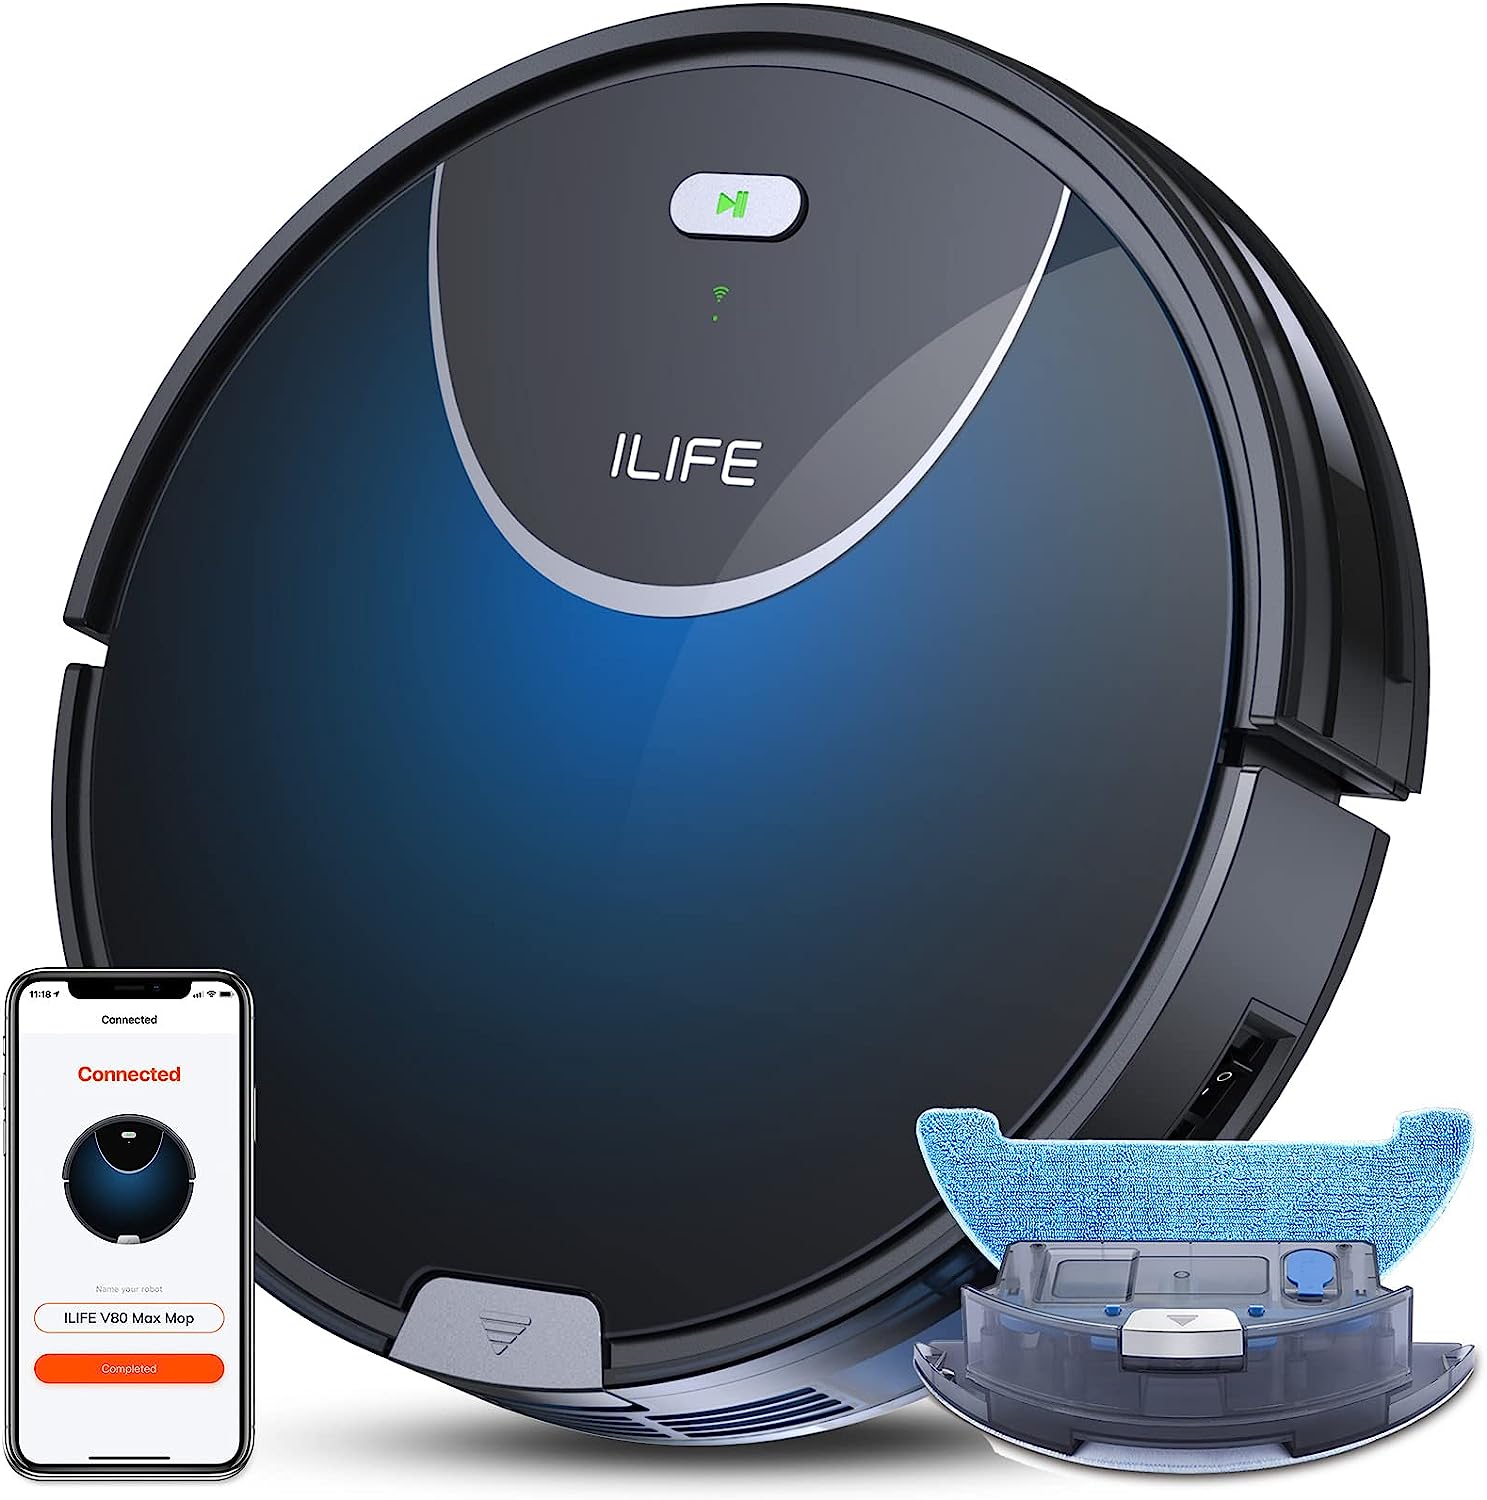 ILIFE V80 Max Mopping Robot Vacuum and Mop Combo - [...]